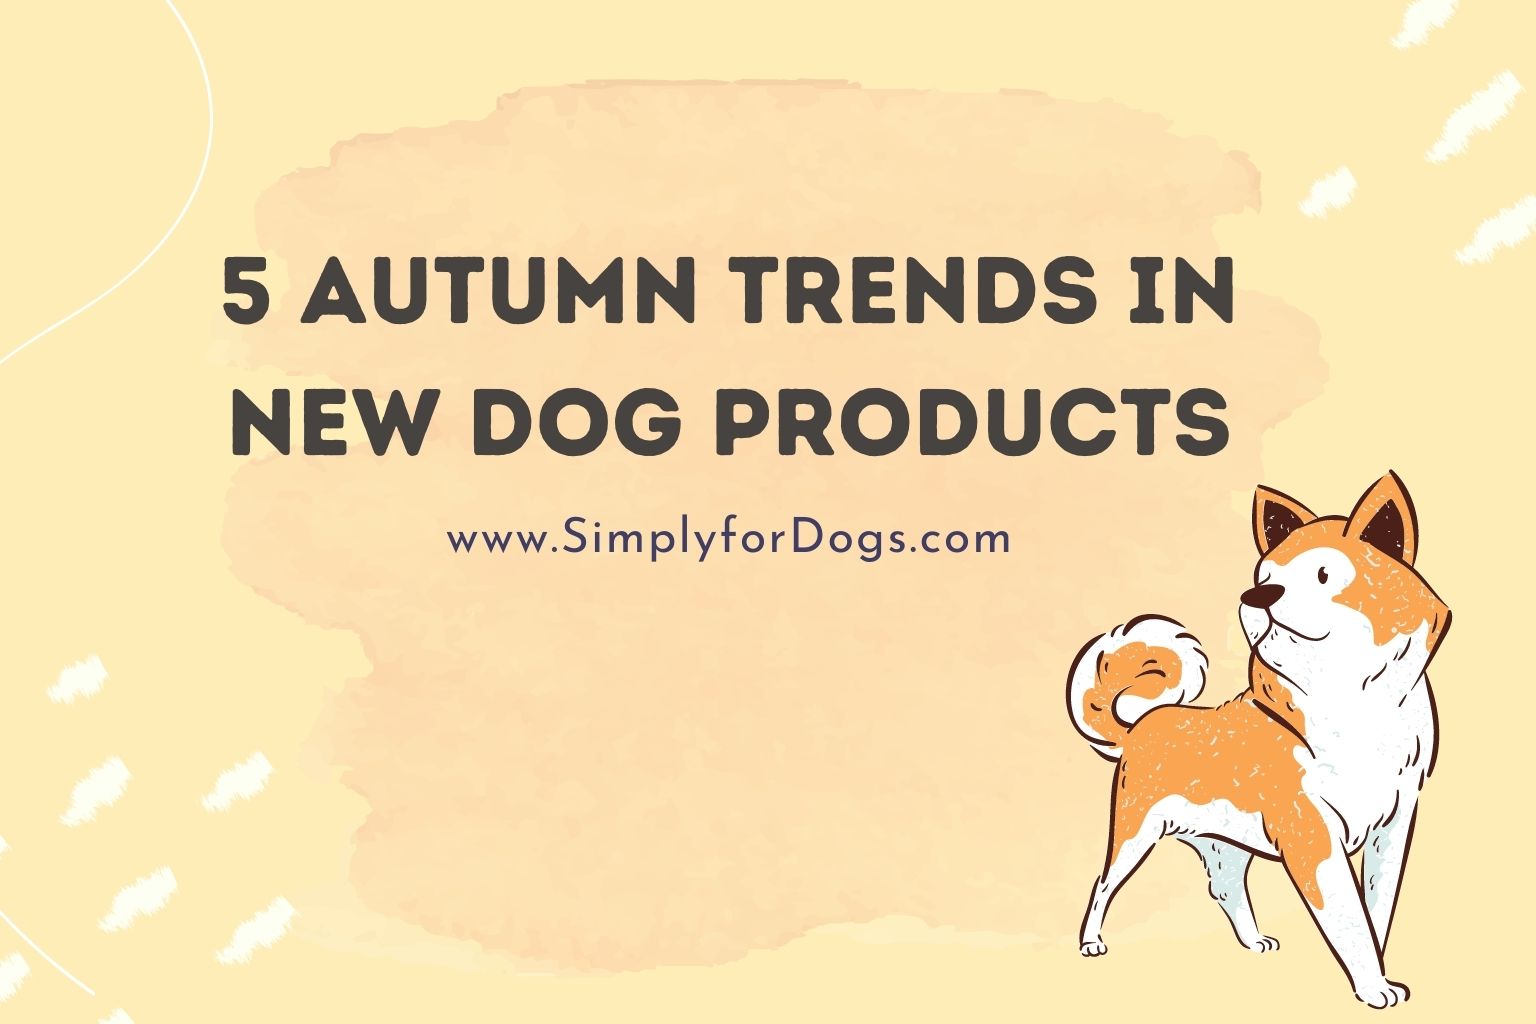 5 Autumn Trends in New Dog Products